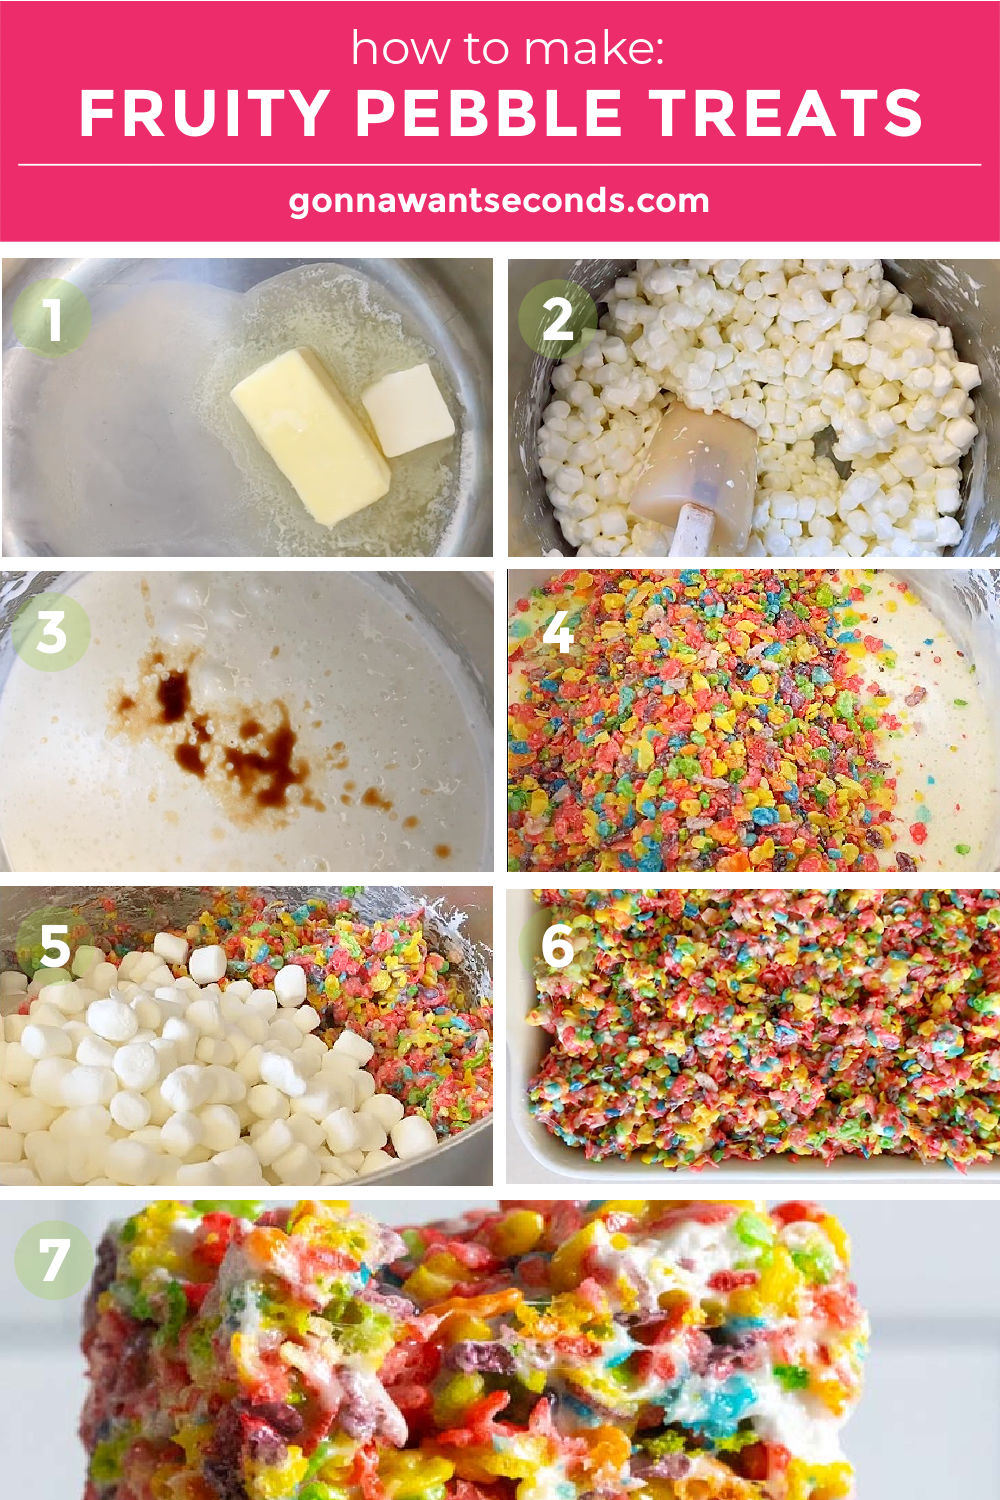 Step by step how to make Fruity Pebbles Treats